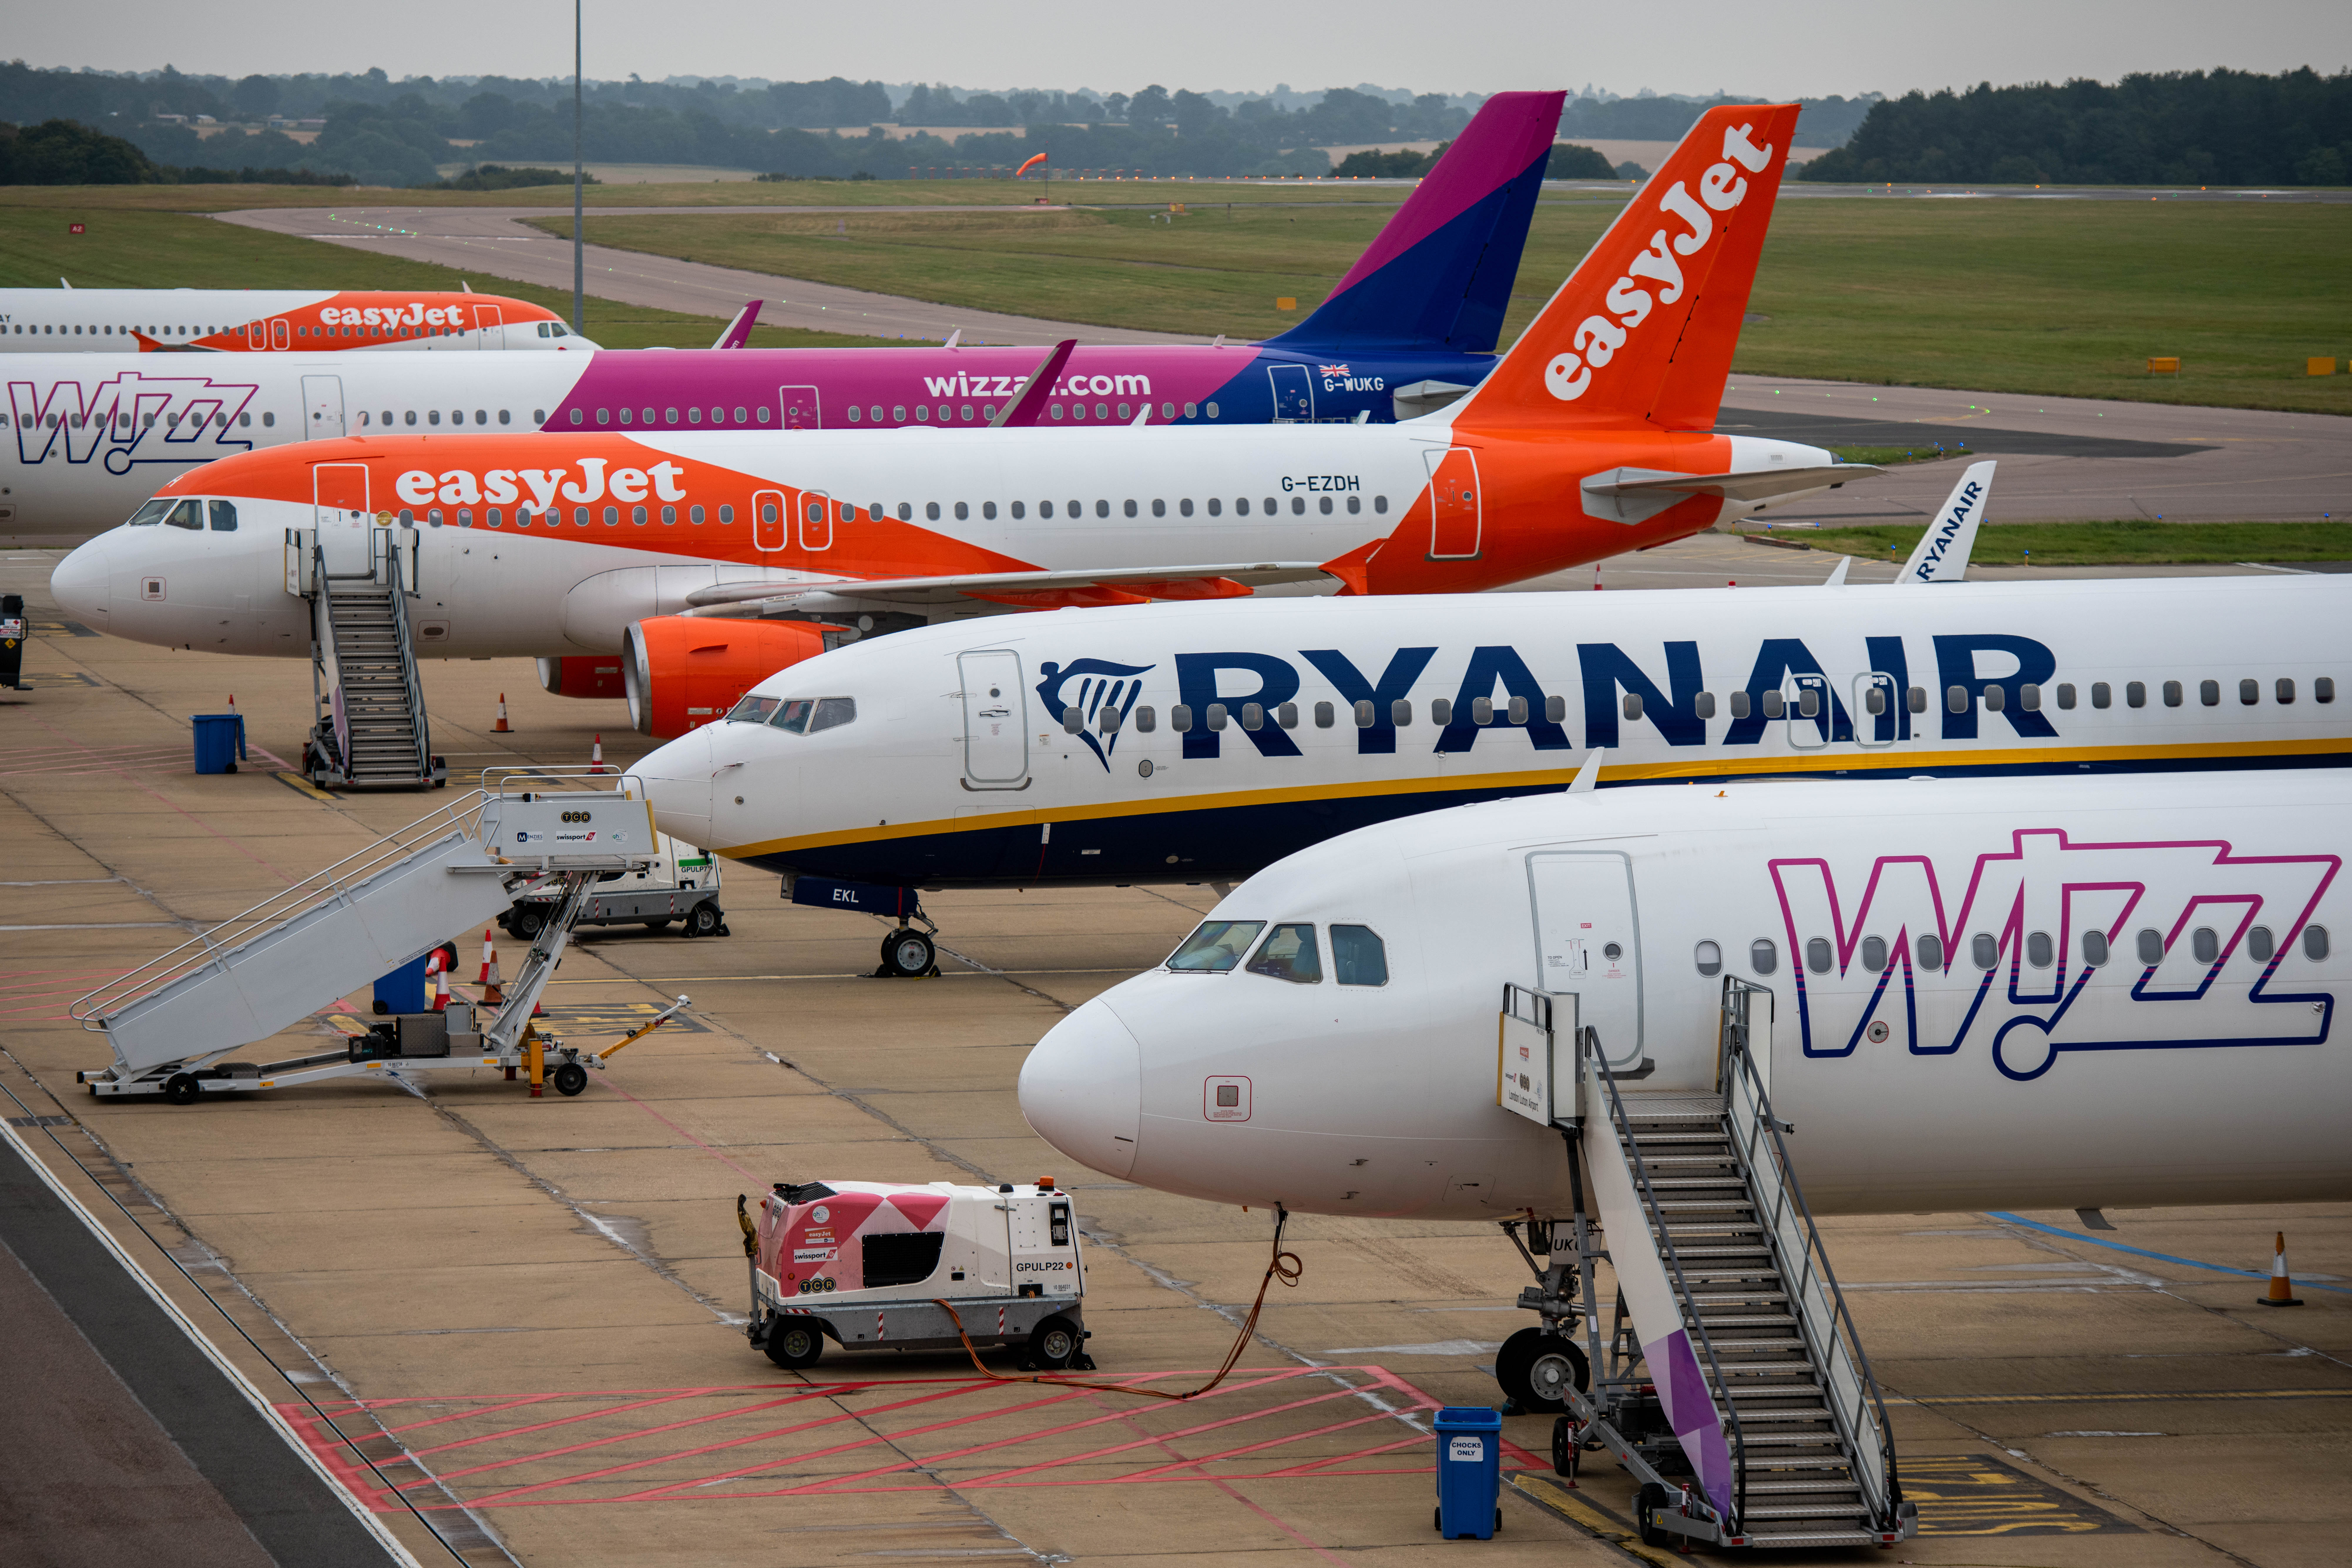 Consumer watchdog Which? found that budget airlines could end up costing passengers more than other airlines